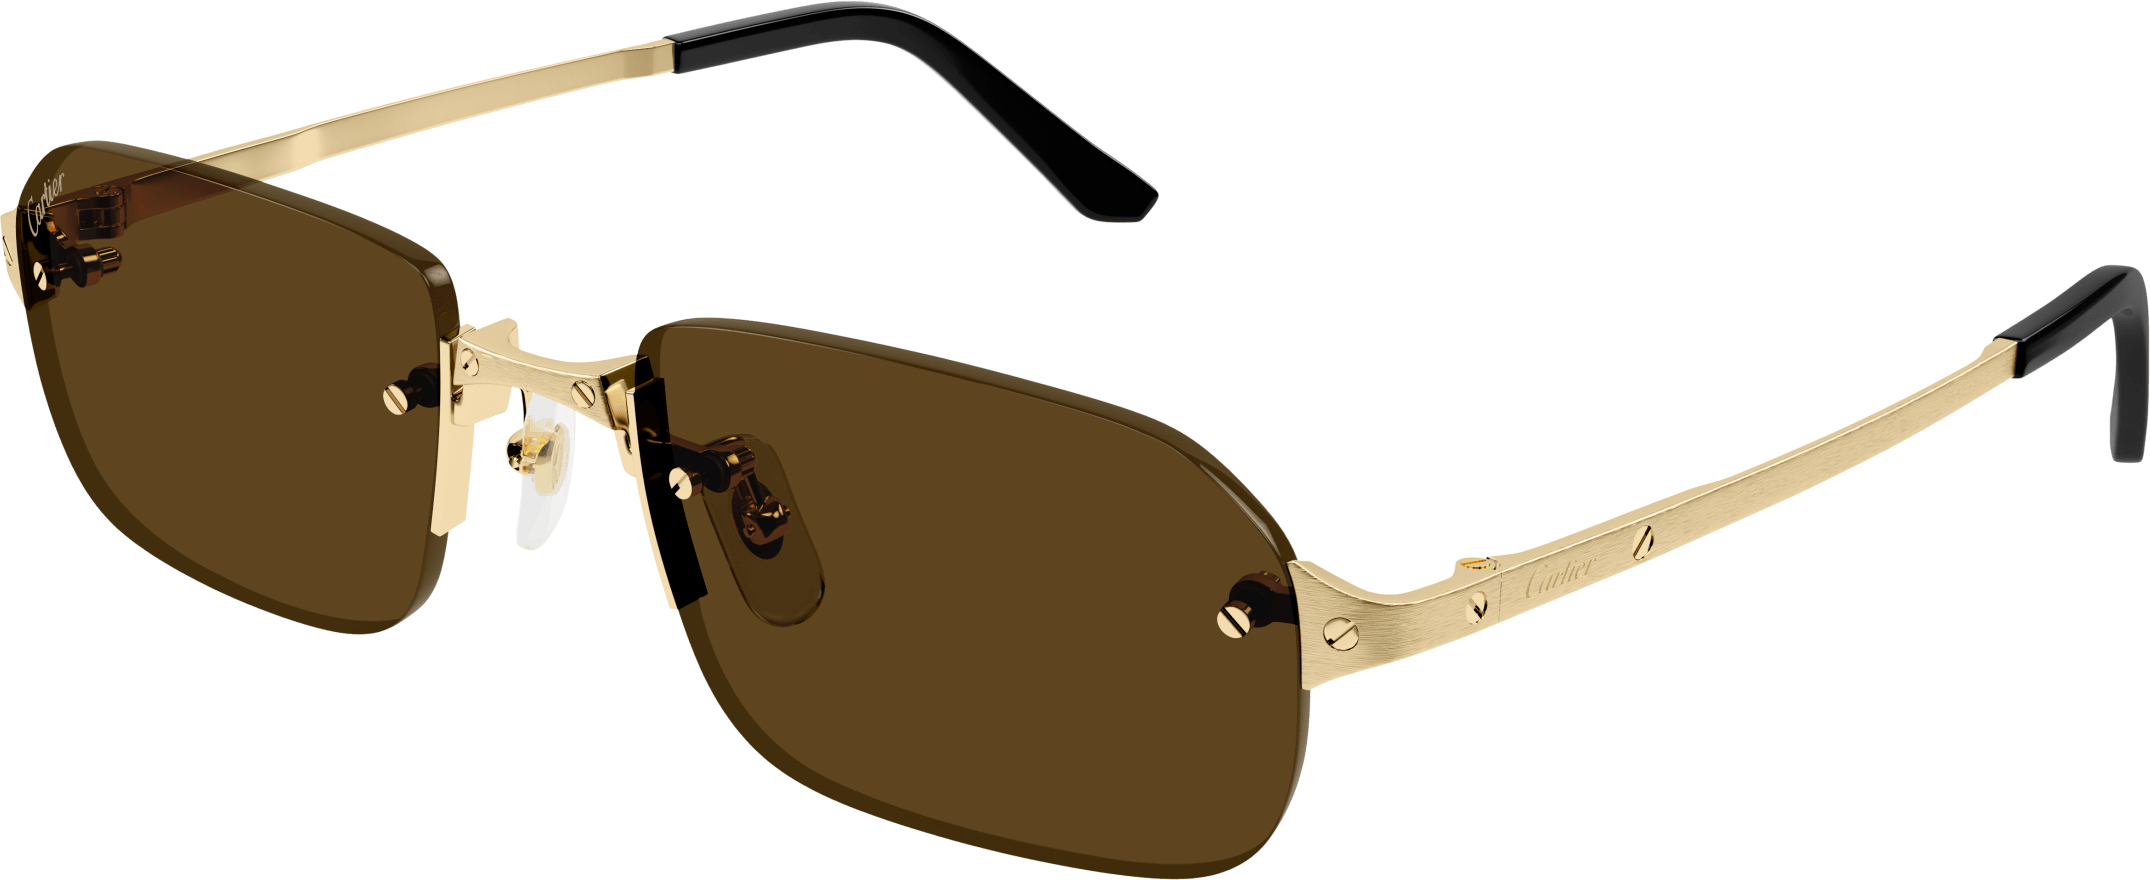 Color_CT0460S-002 - GOLD - BROWN - AR (ANTI REFLECTIVE)